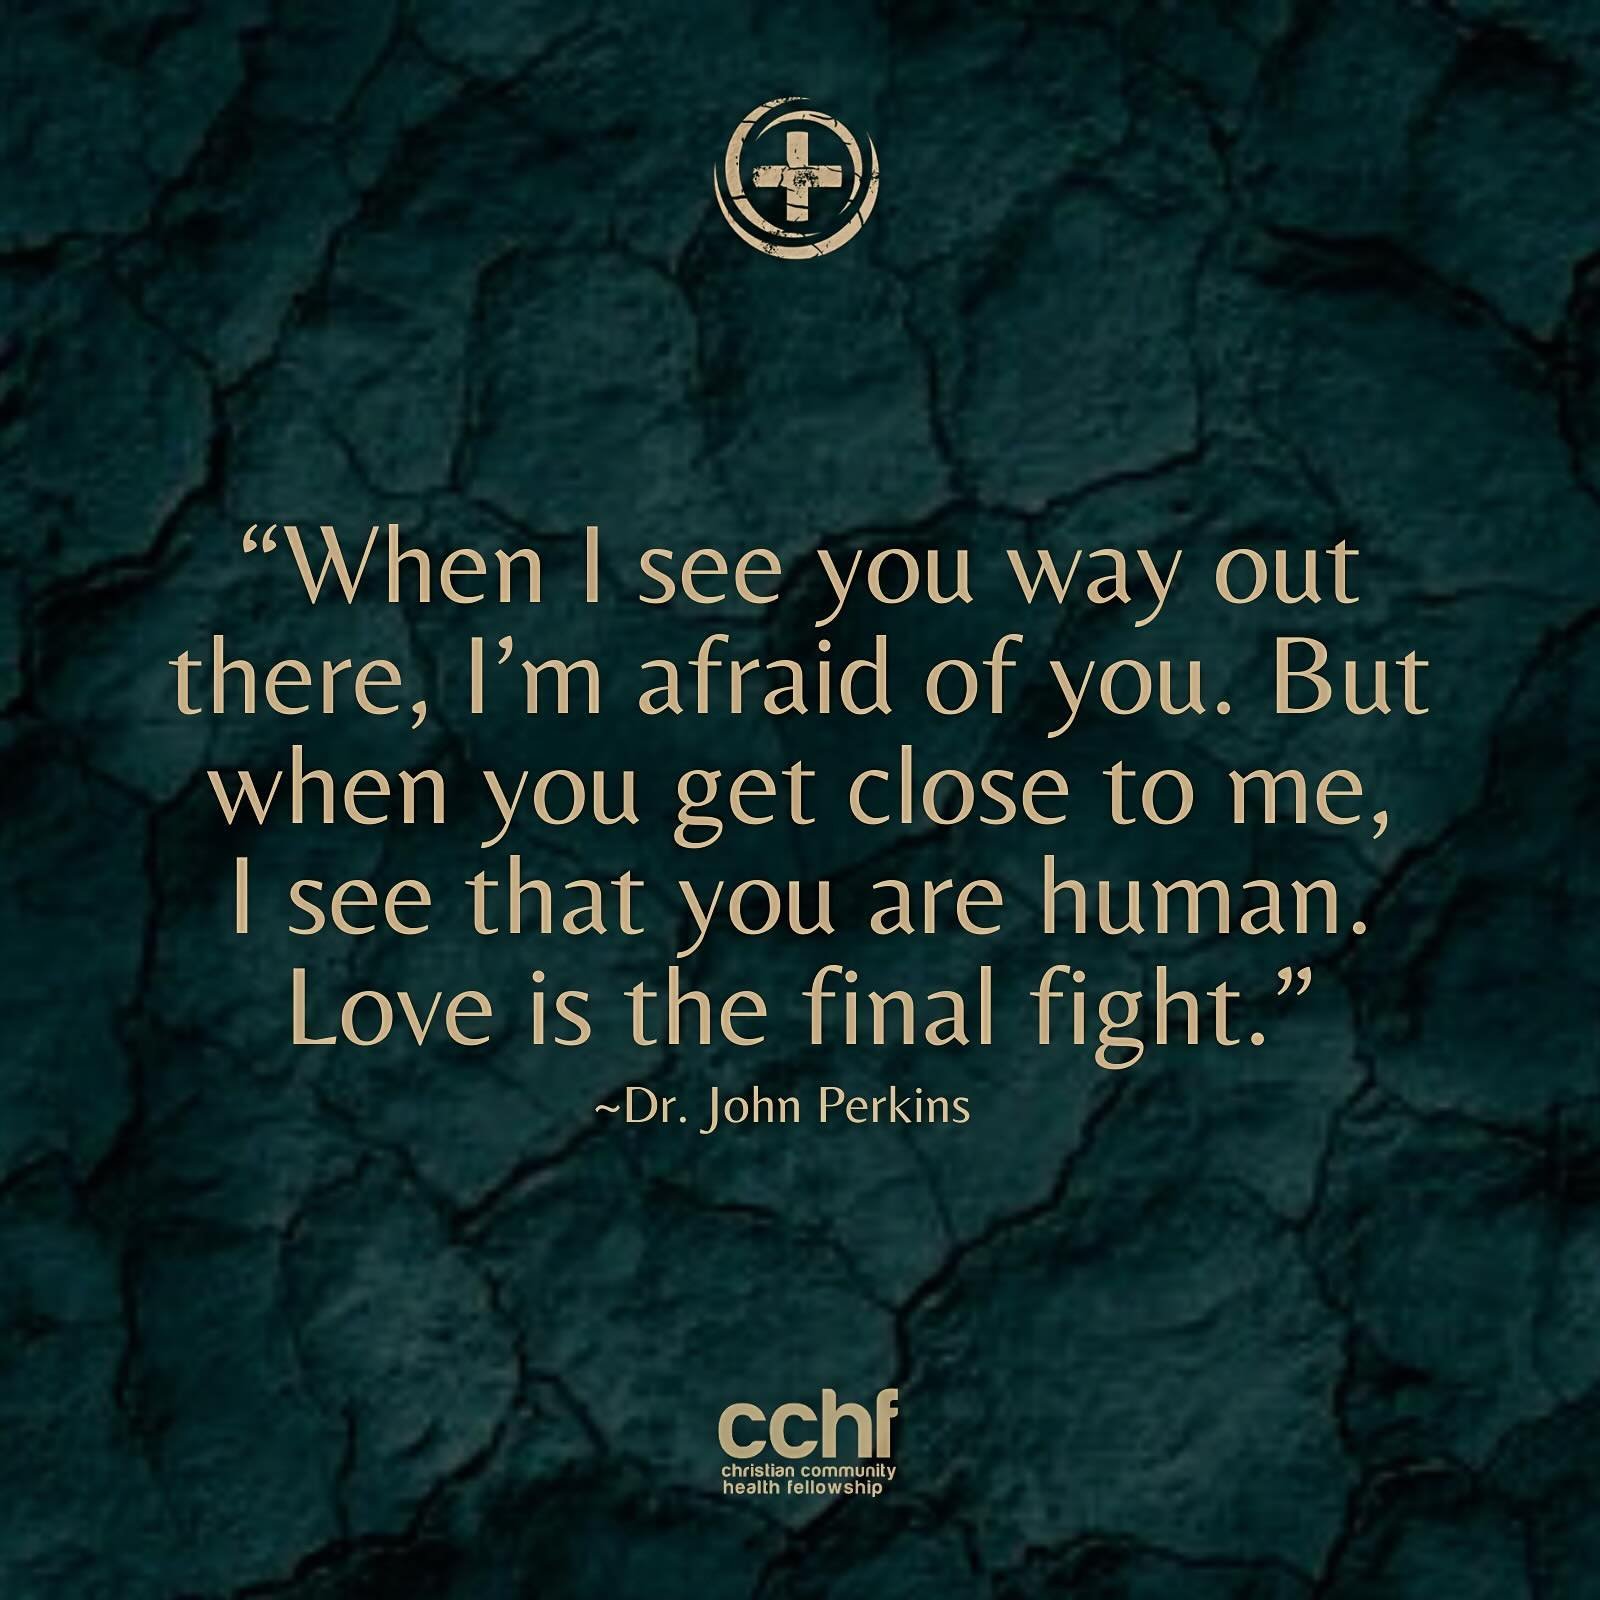 Let&rsquo;s not forsake nor forget the foundations of this CCHF movement that Dr. John Perkins and many others laid. In a time when many seek to divide, stir up anger and hatred, let us be reminded that love conquers all. Let us listen, come close to